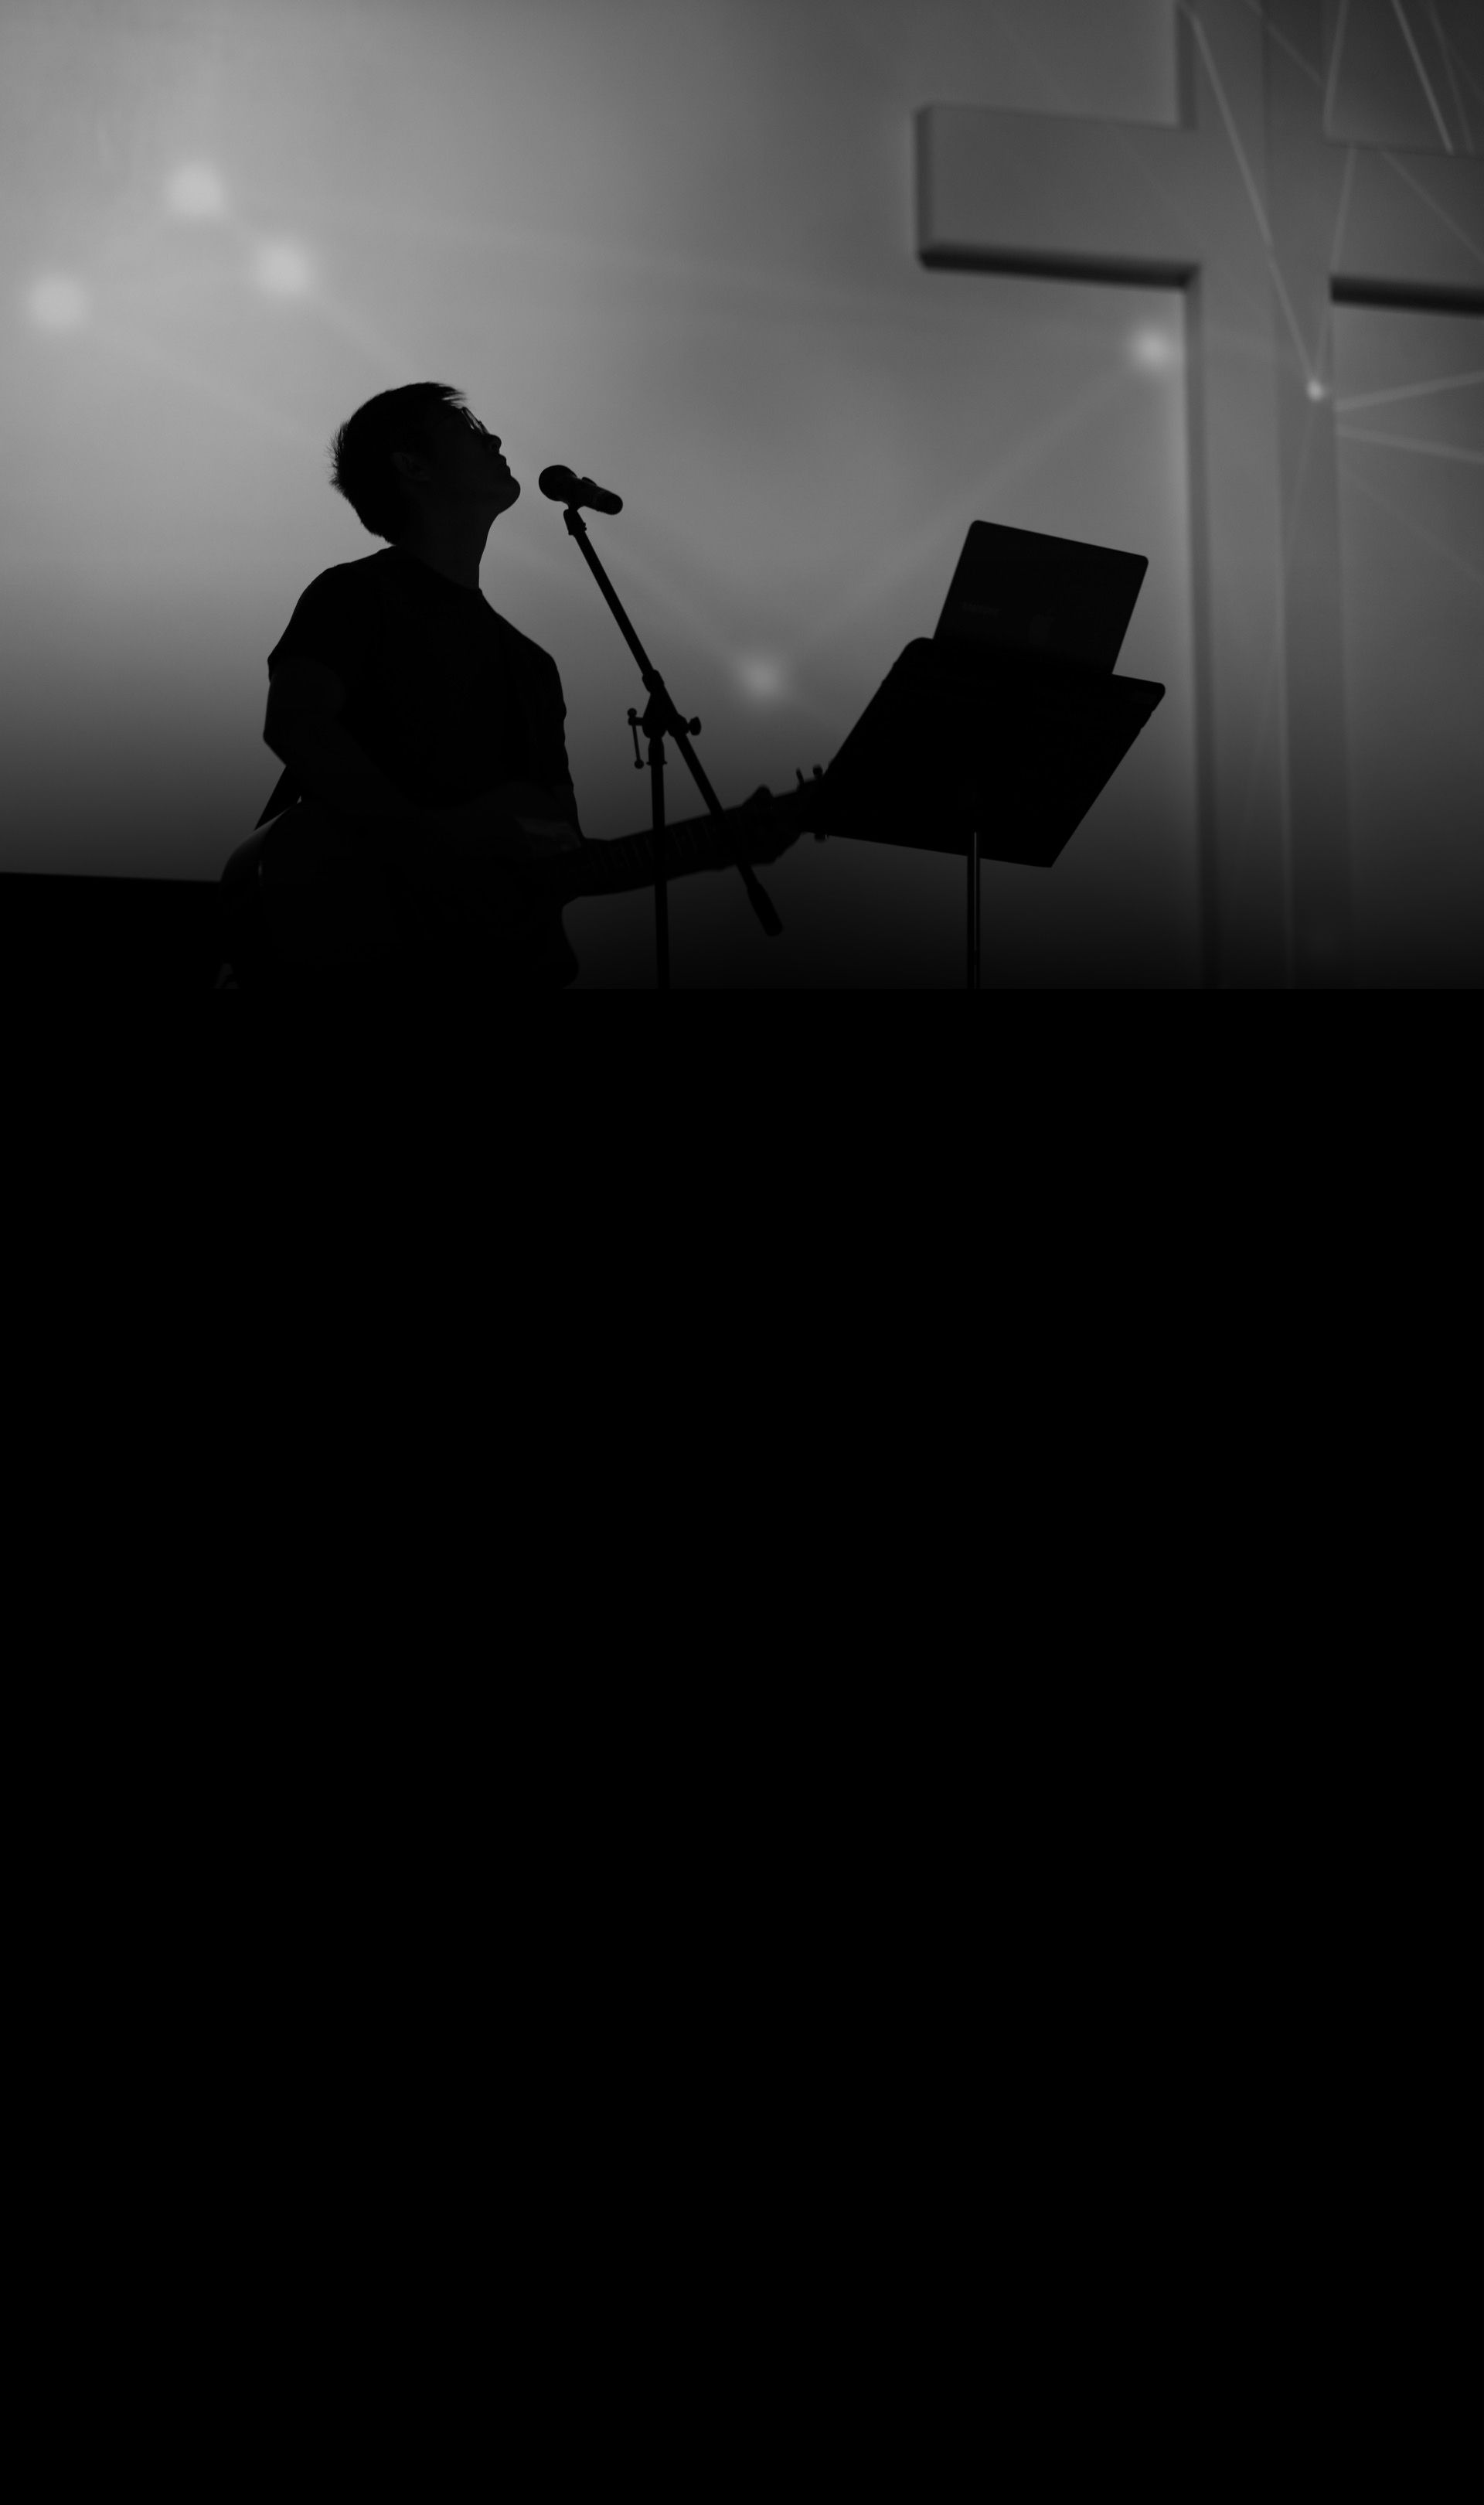 Photograph of Man's Silhouette on Stage